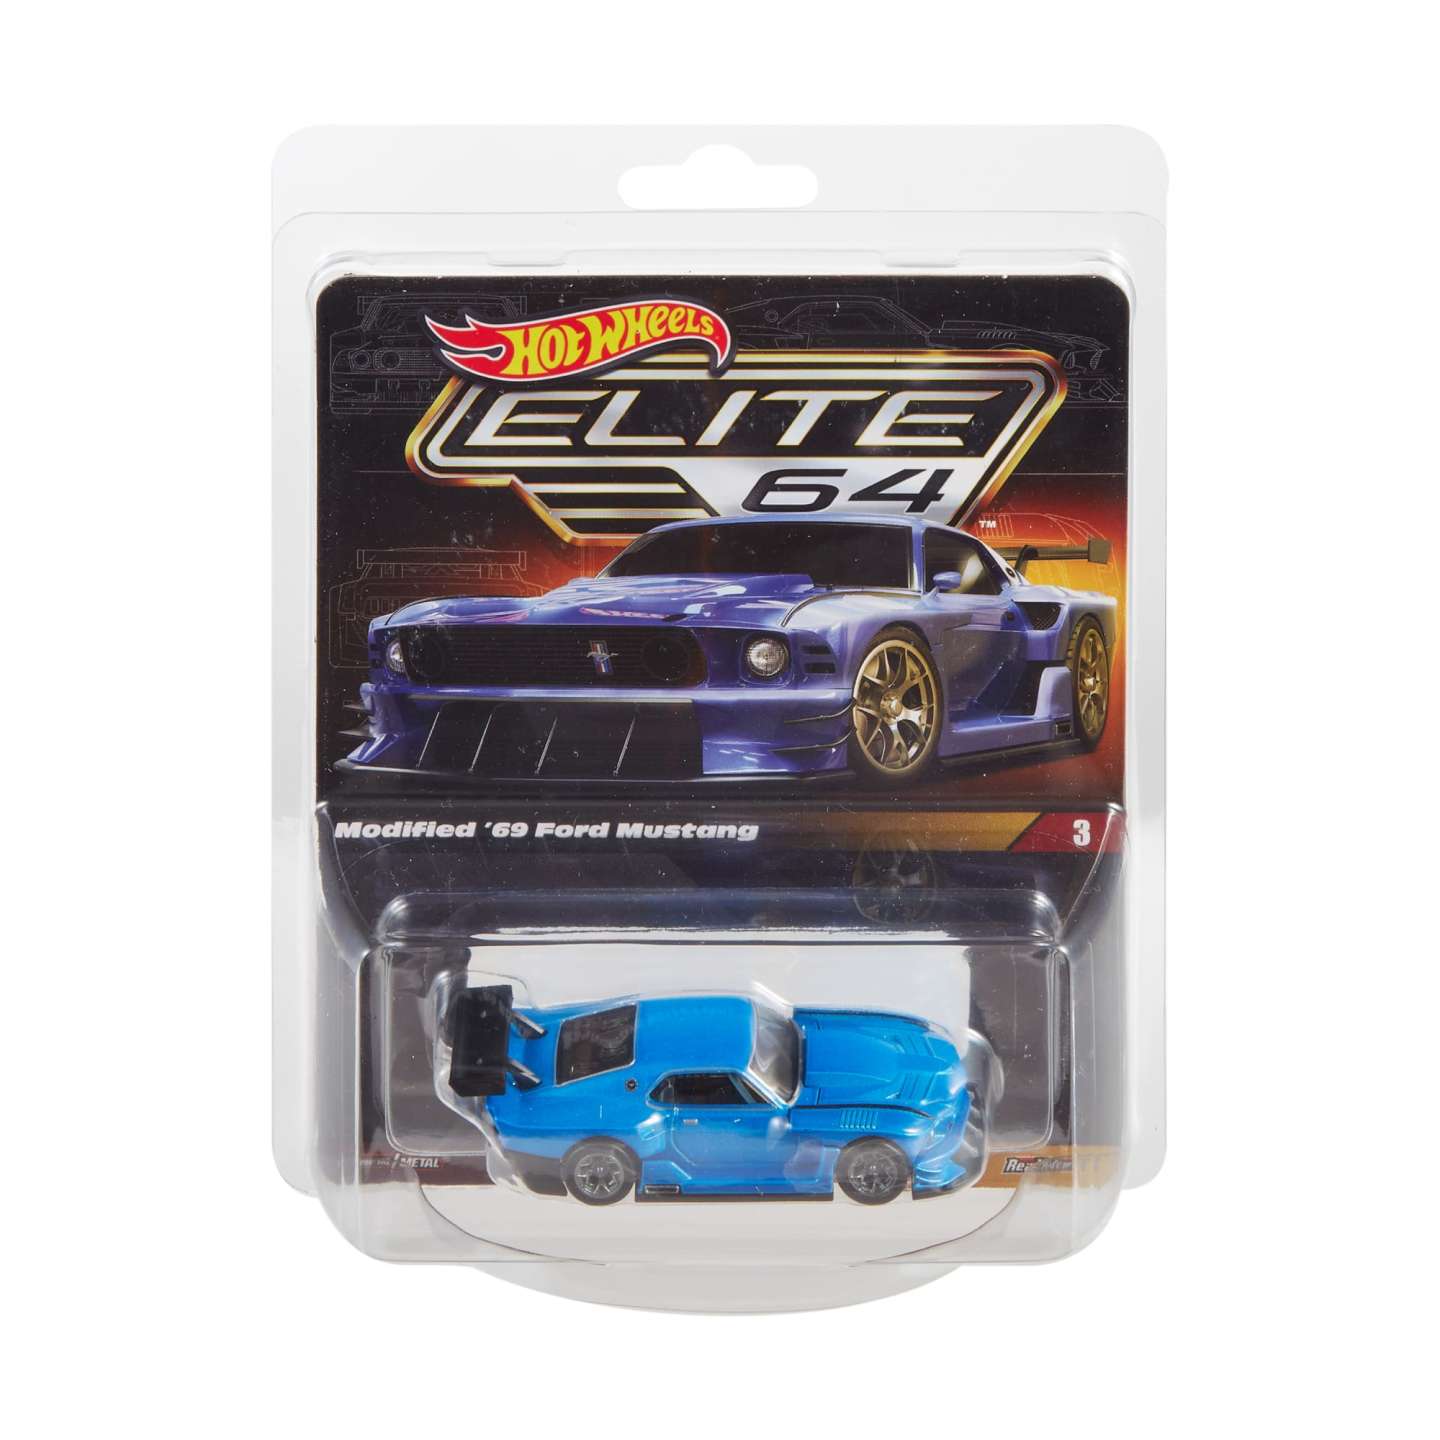 Hot Wheels Elite 64 - Modified '69 Ford Mustang